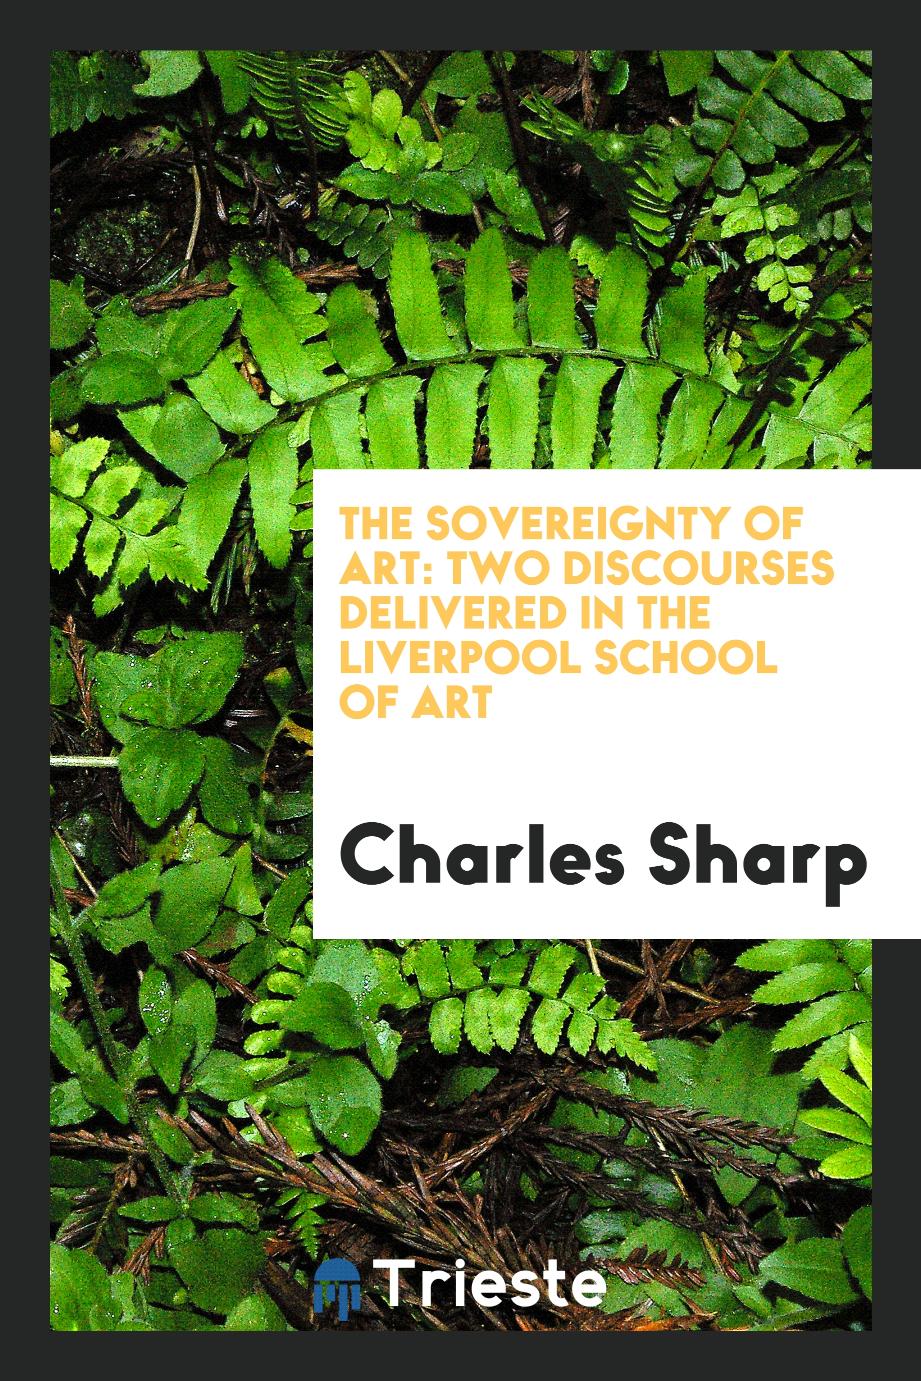 The Sovereignty of Art: Two Discourses Delivered in the Liverpool School of Art